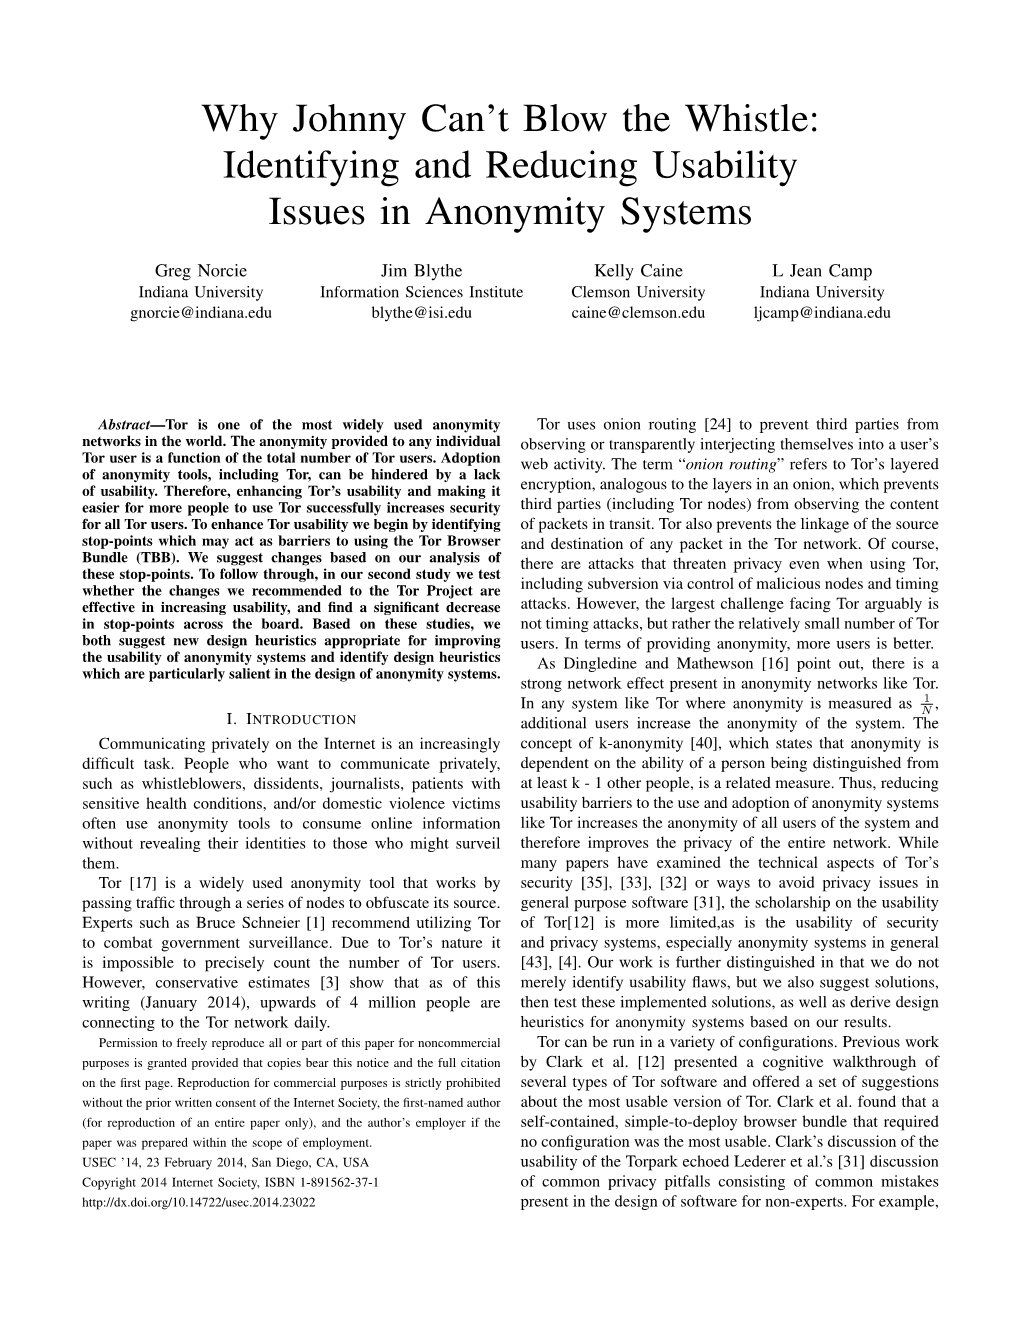 Identifying and Reducing Usability Issues in Anonymity Systems